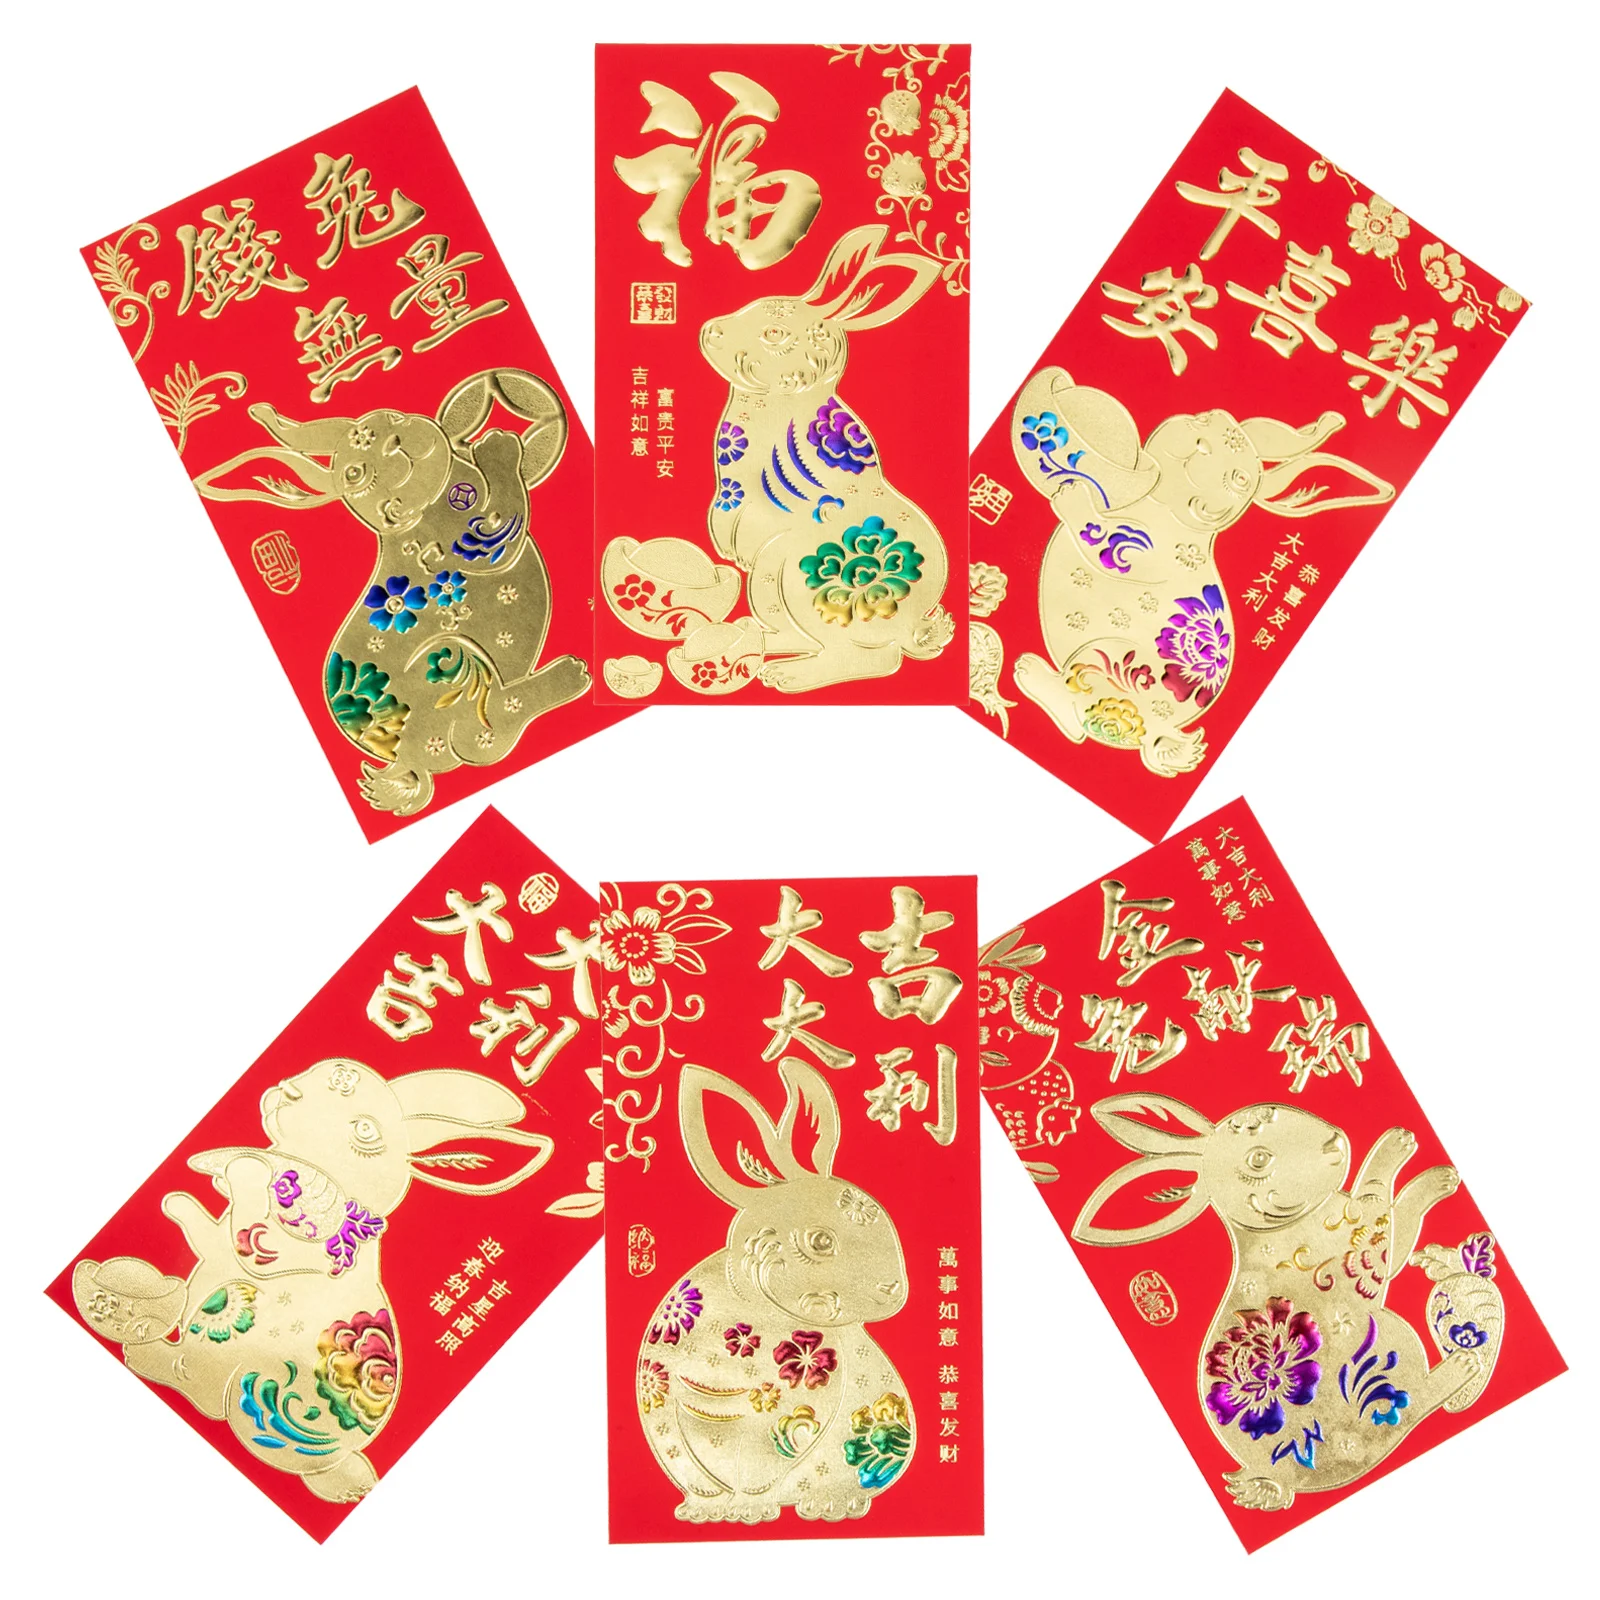 

Red Envelopes Year Envelope Chinese New Money Rabbit Packet Festival Spring Cash Pocket Hong Bao Packets Lunar Lucky Wedding The